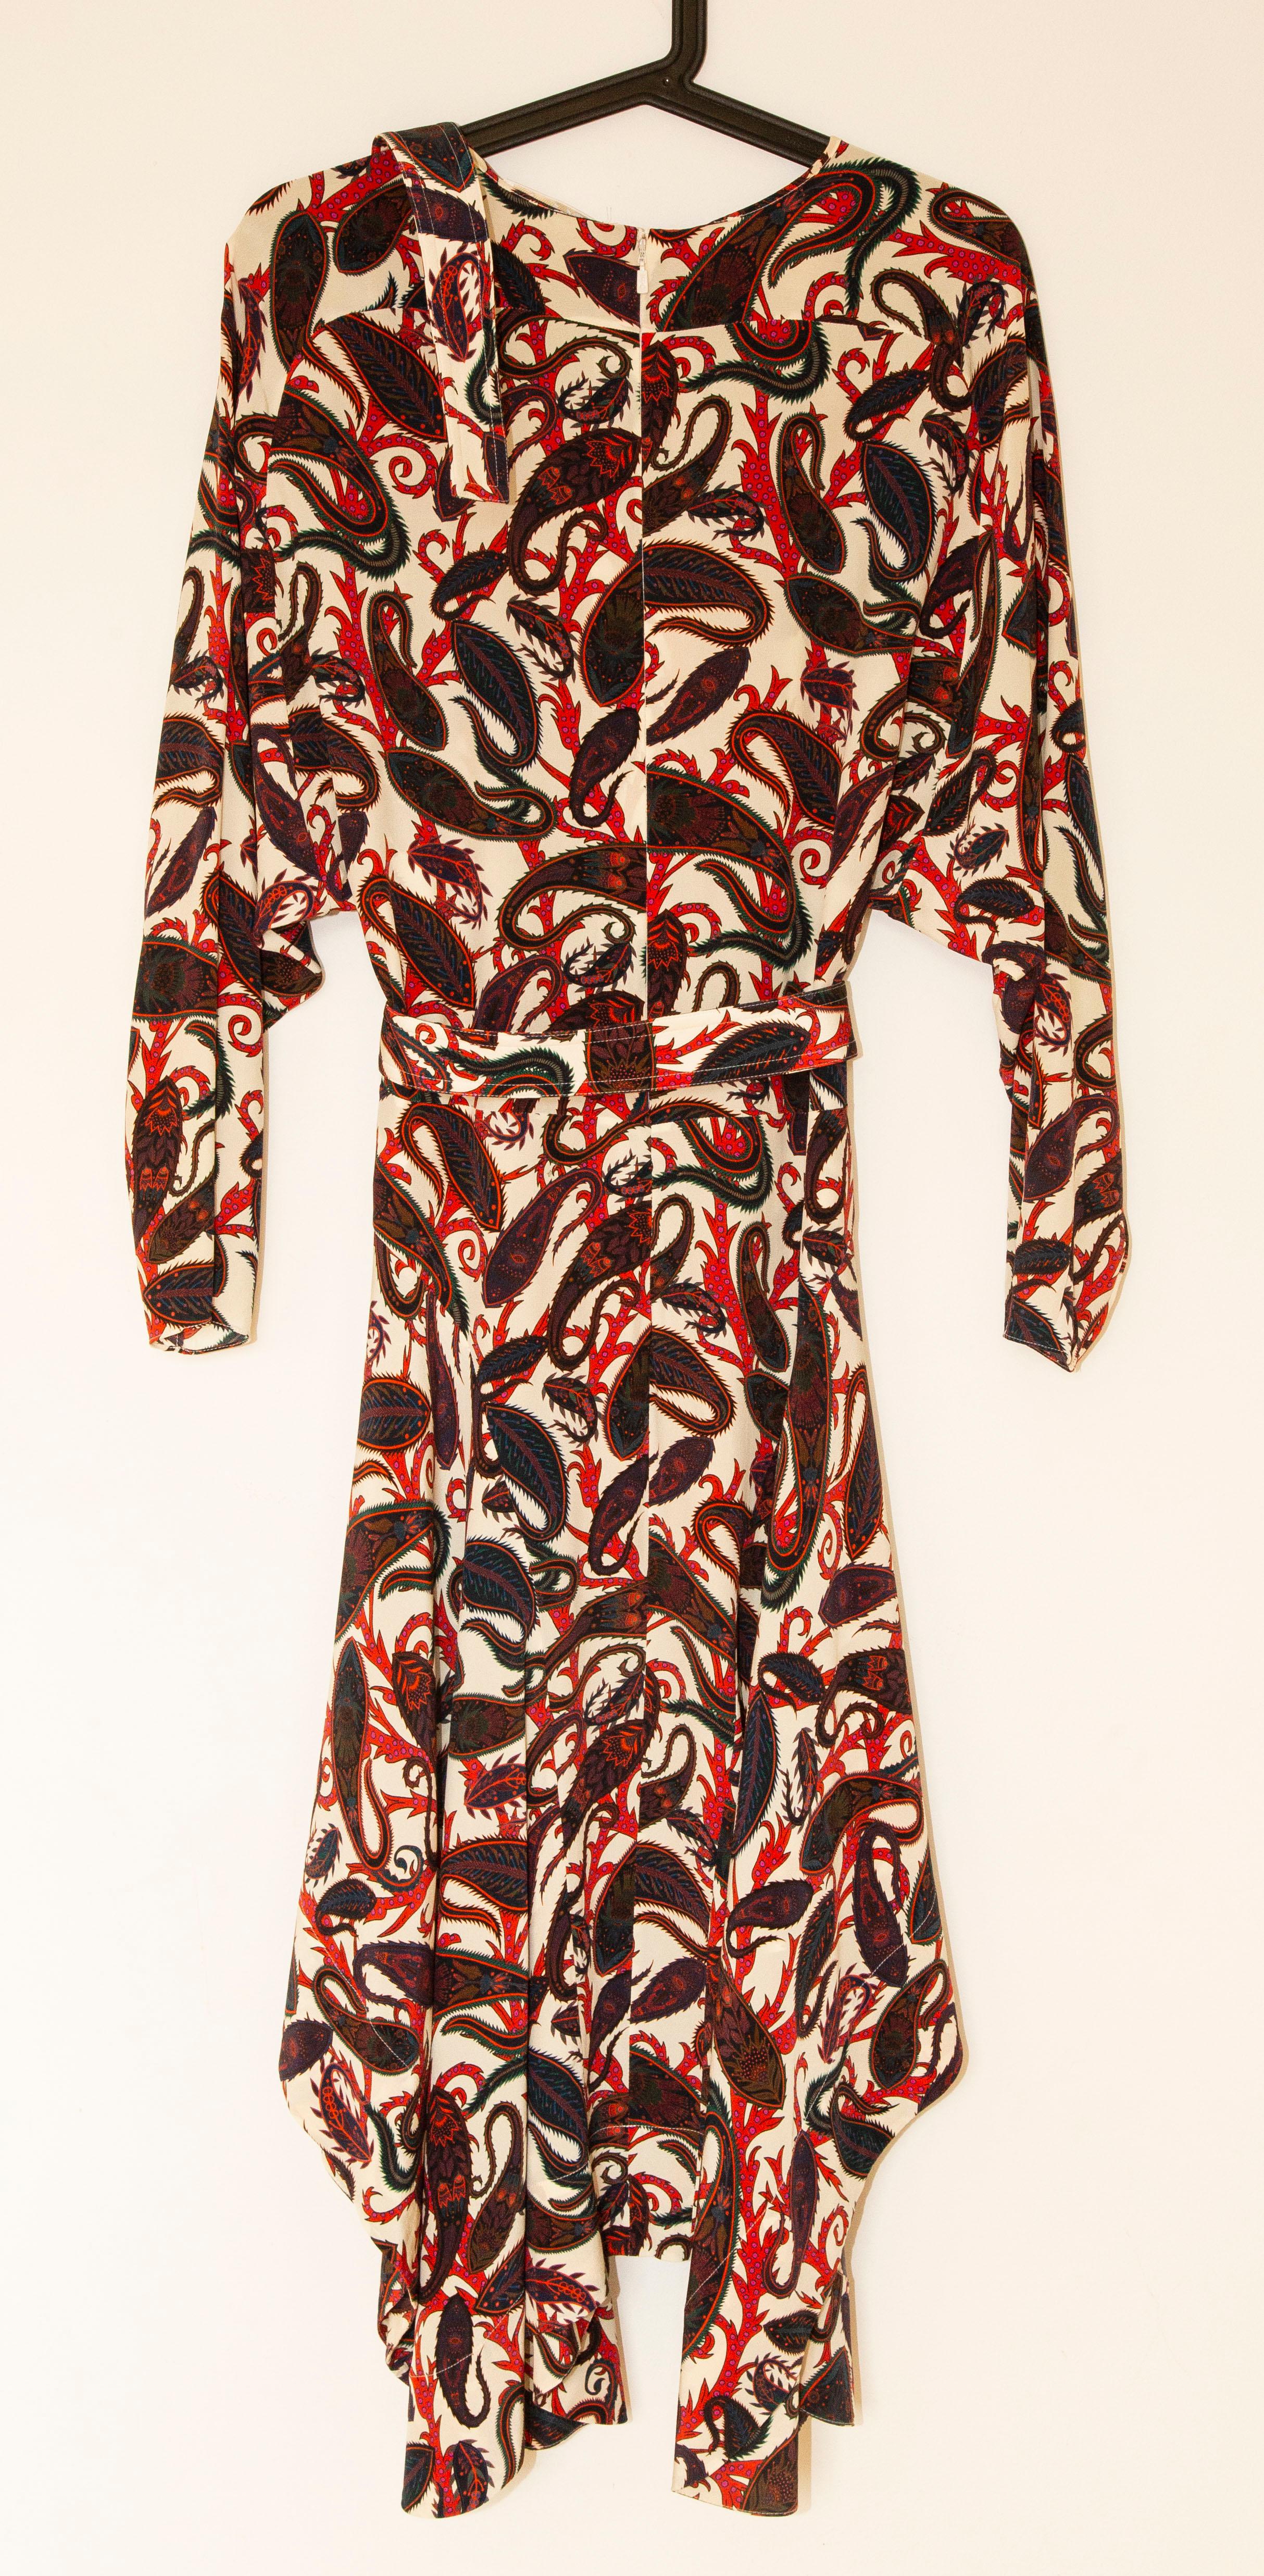 A Chloe silk mid length dress with blue, red, green, pink paisley print. The dress features  asymmetric bottom, long sleeves, and belt with a silver toned buckle. The condition is very good.